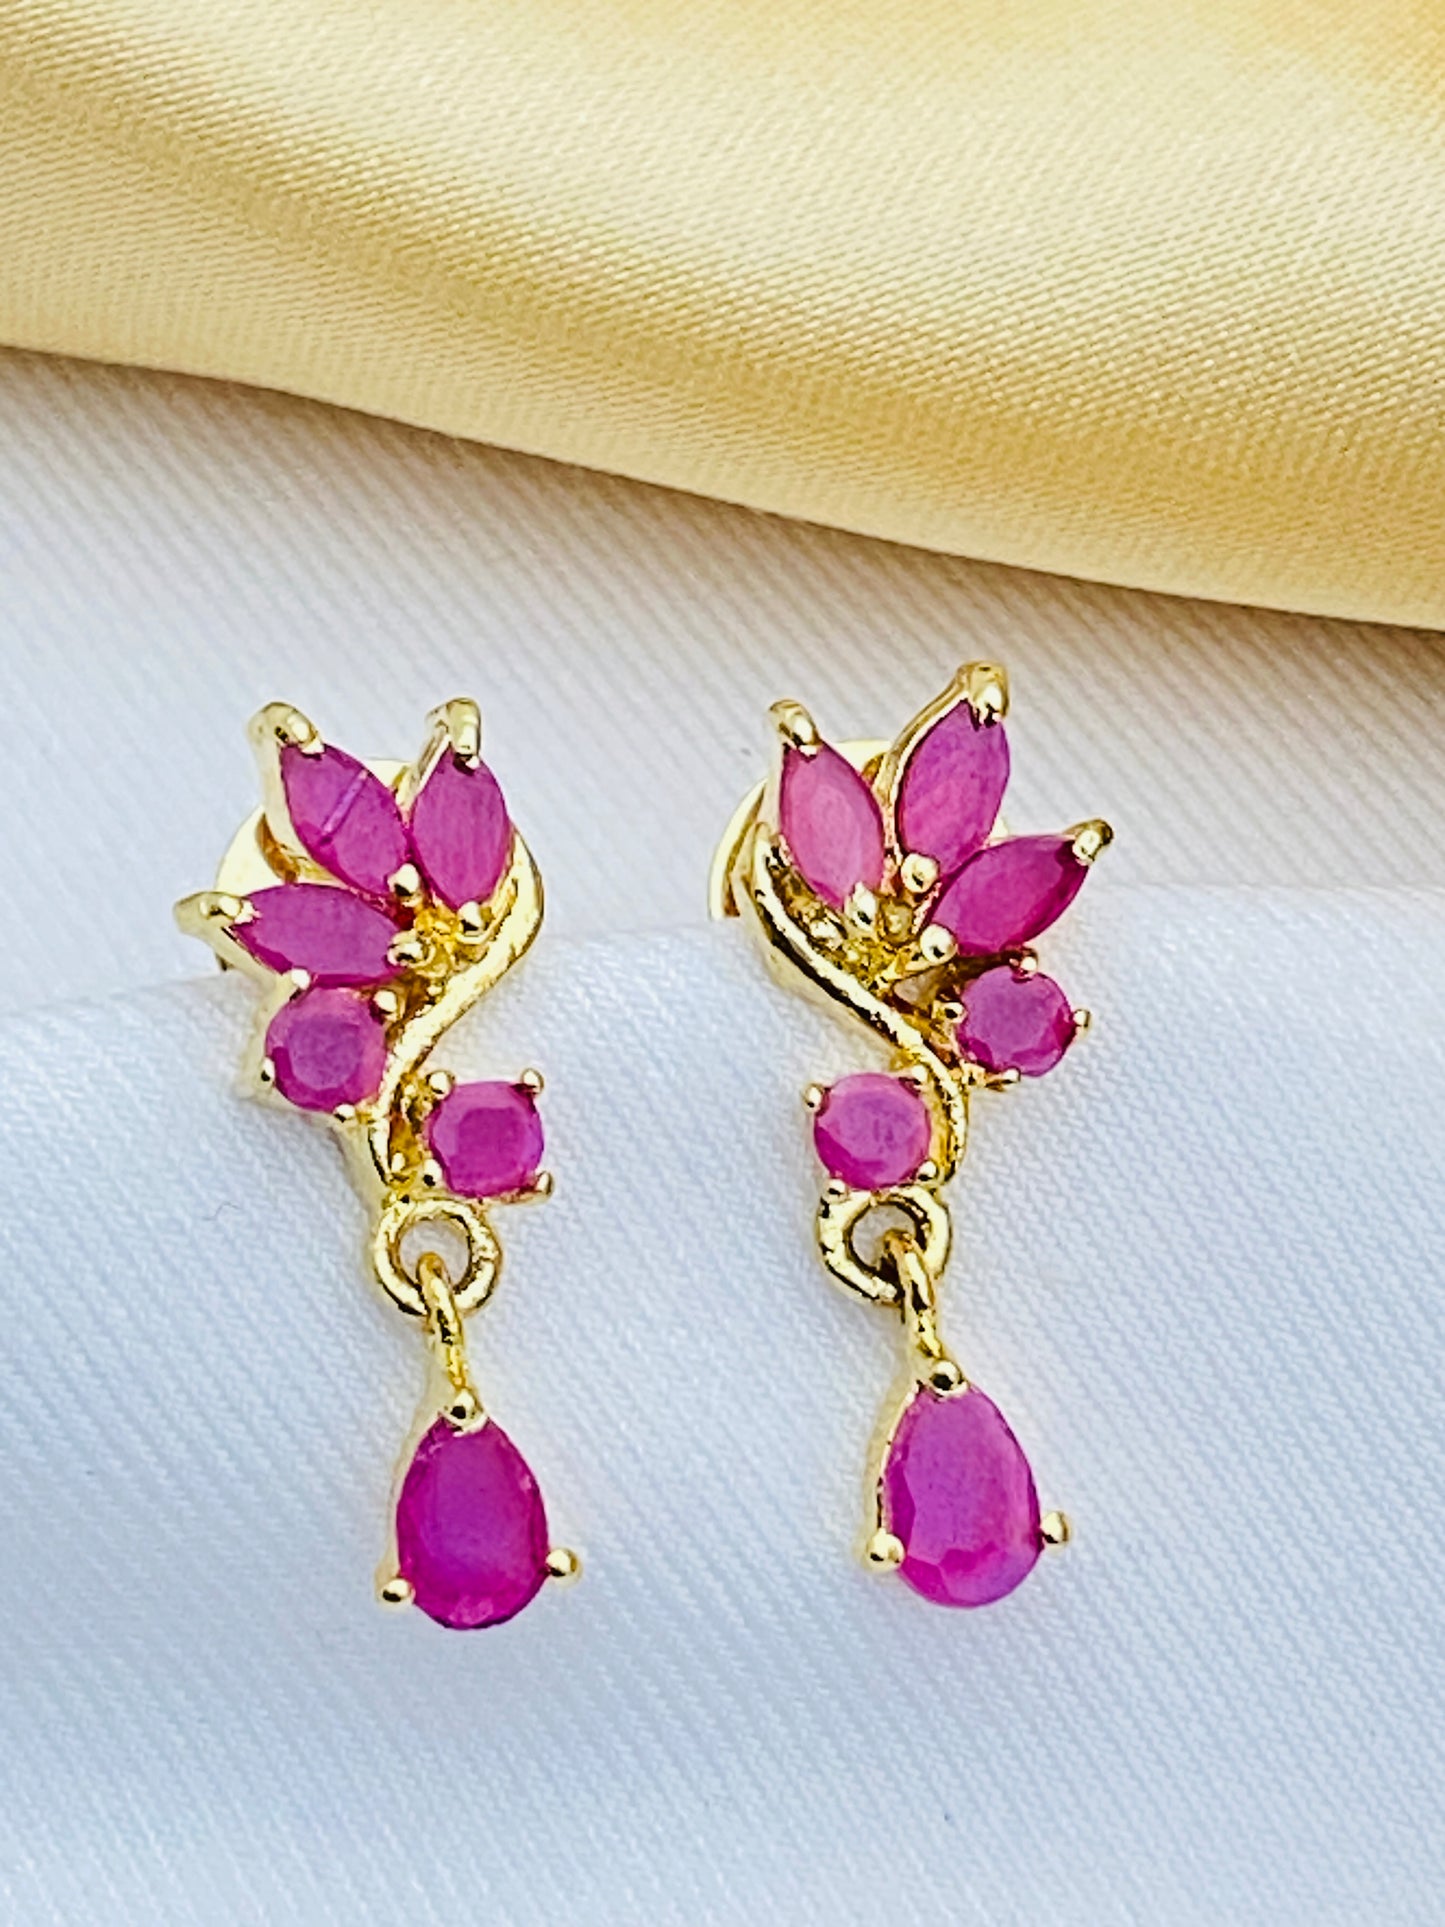 Elegant Ruby Stoned Gold Plated Earrings With Drops